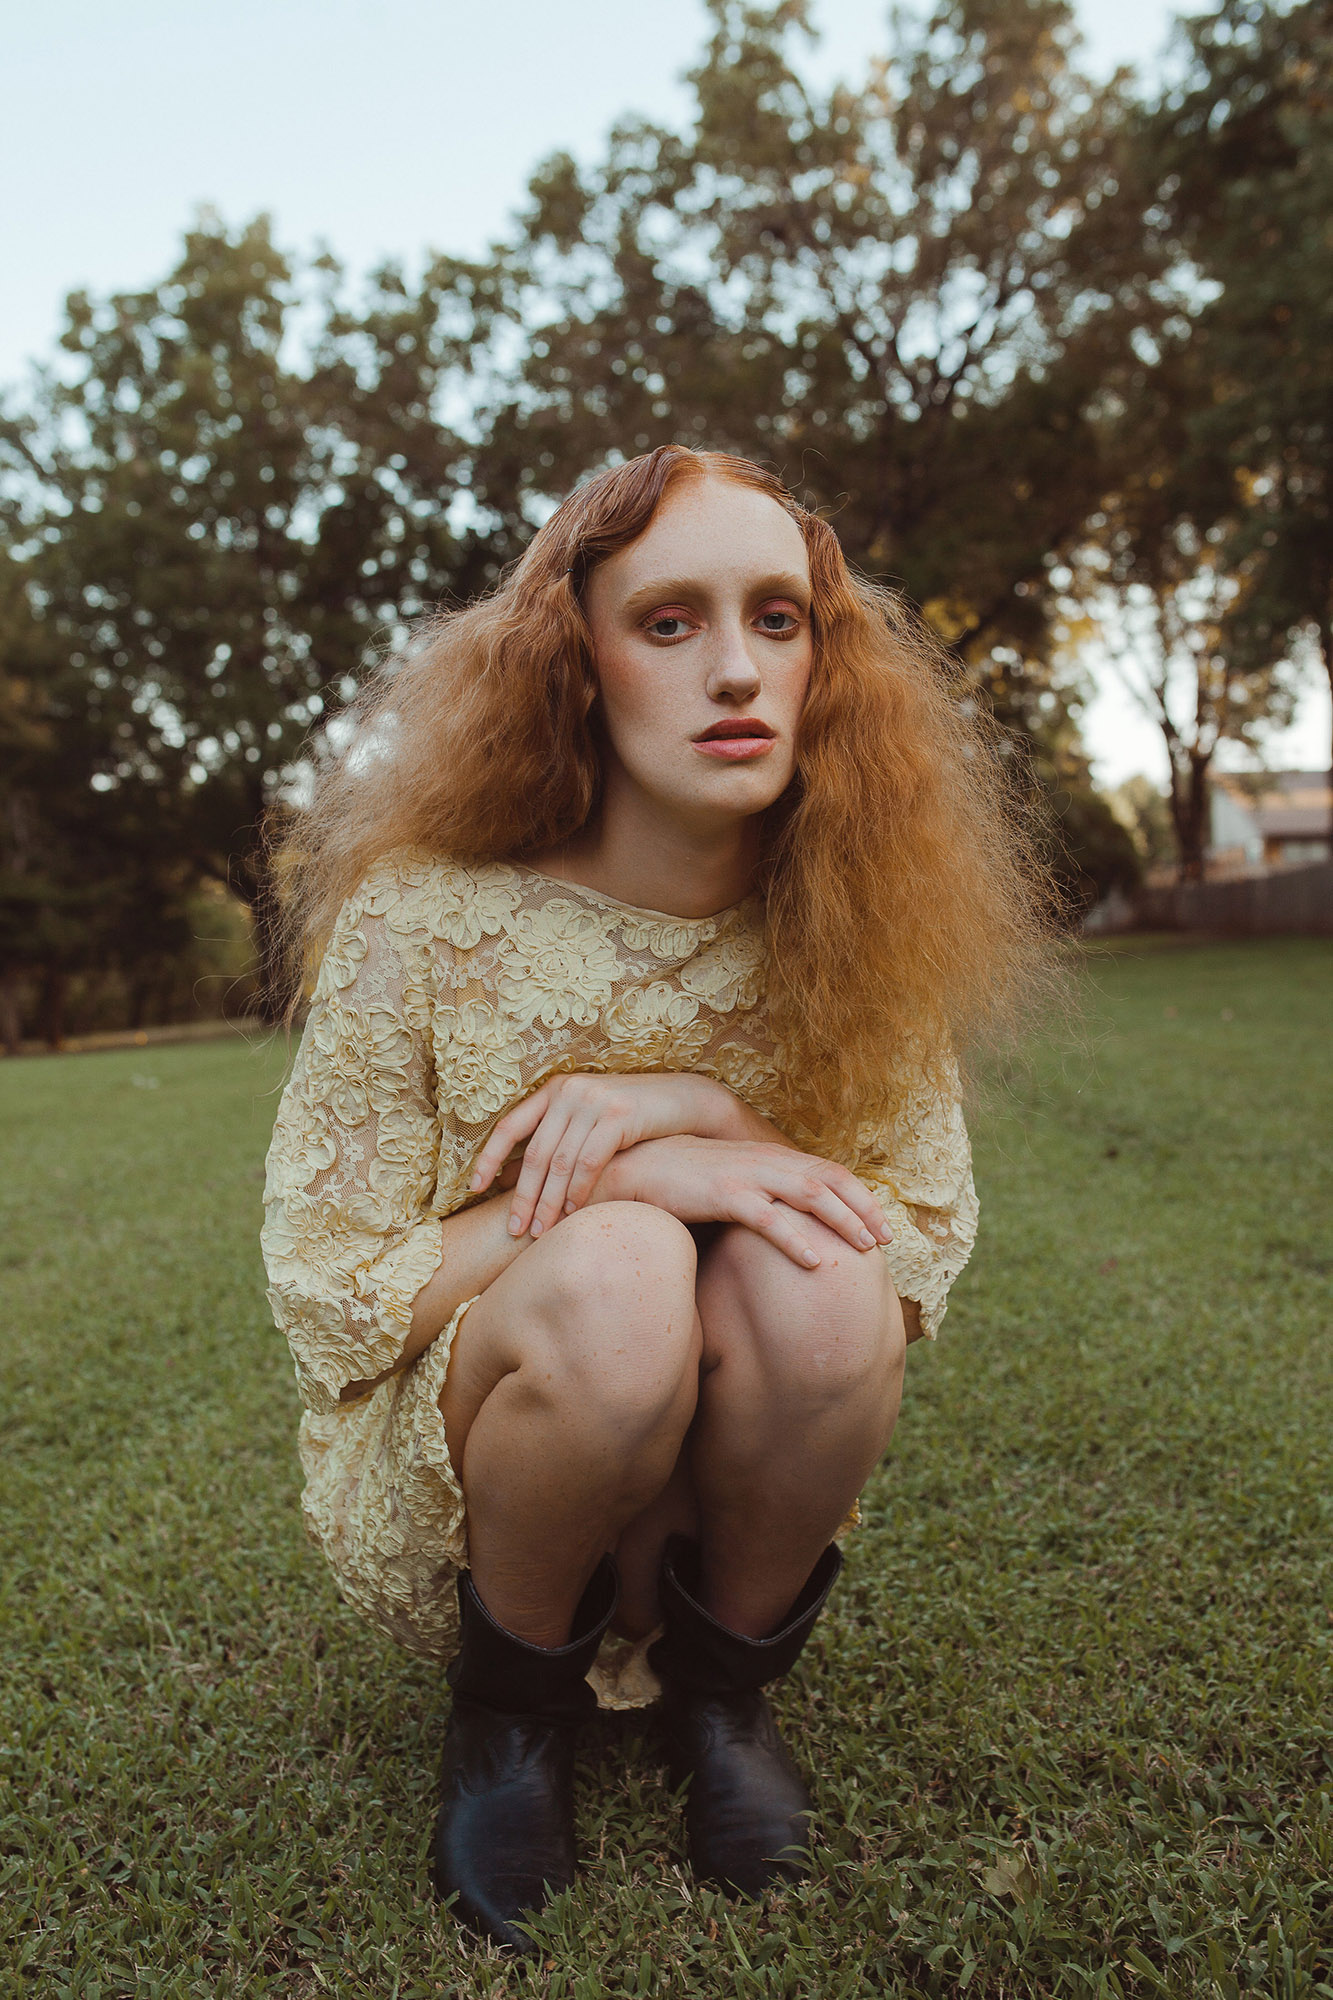 Editorial by Brittany Phillips